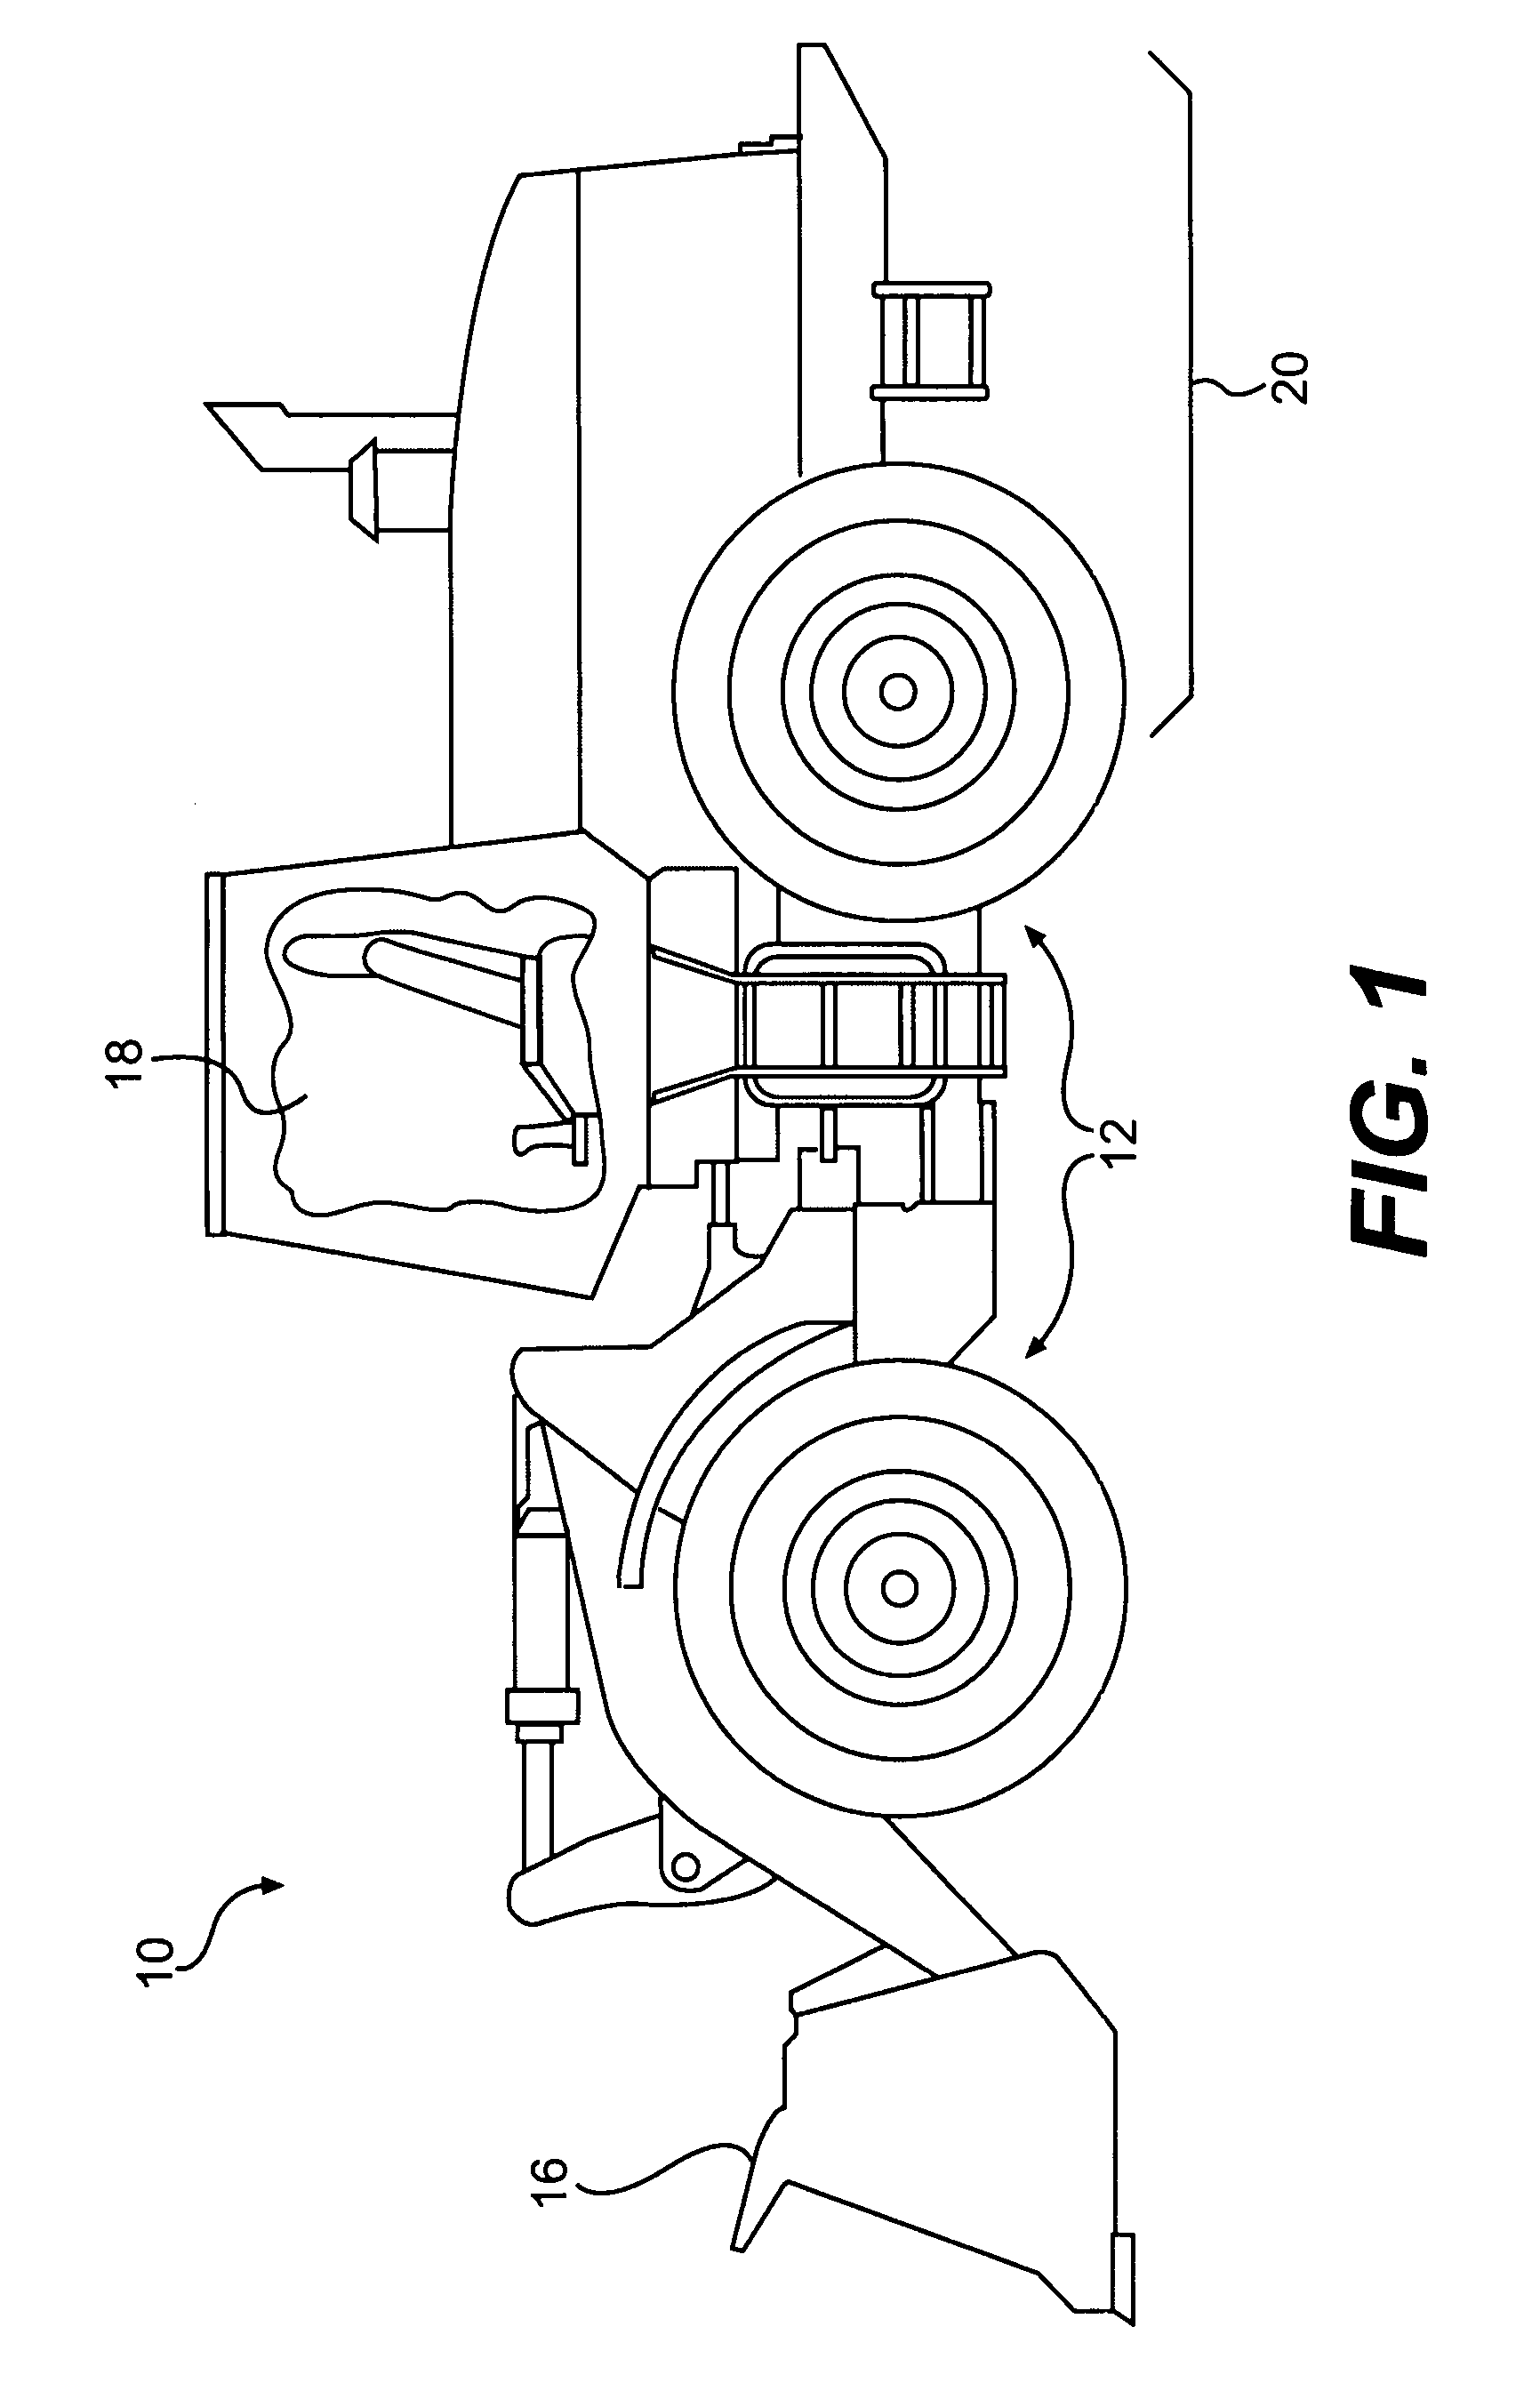 CVT control system having variable power source speed